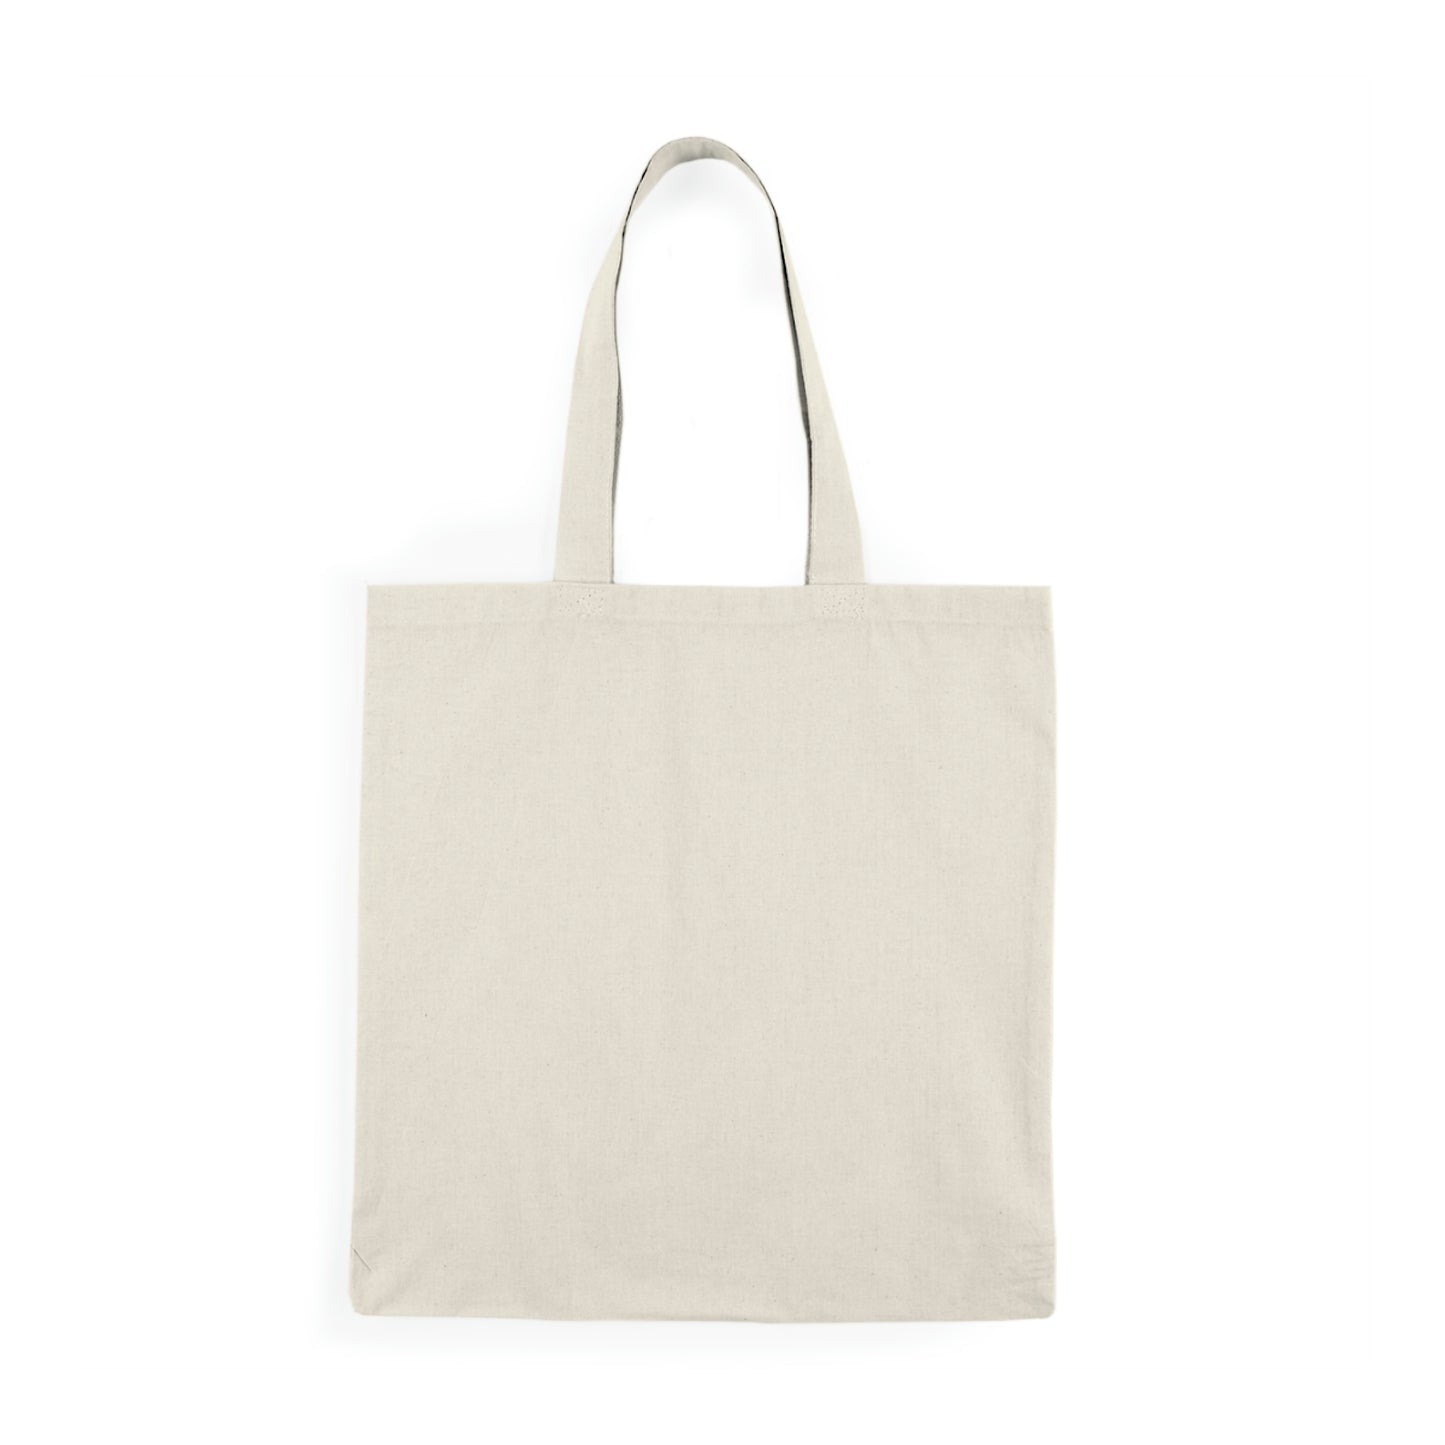 Catching Butterflies - Natural Tote Bag